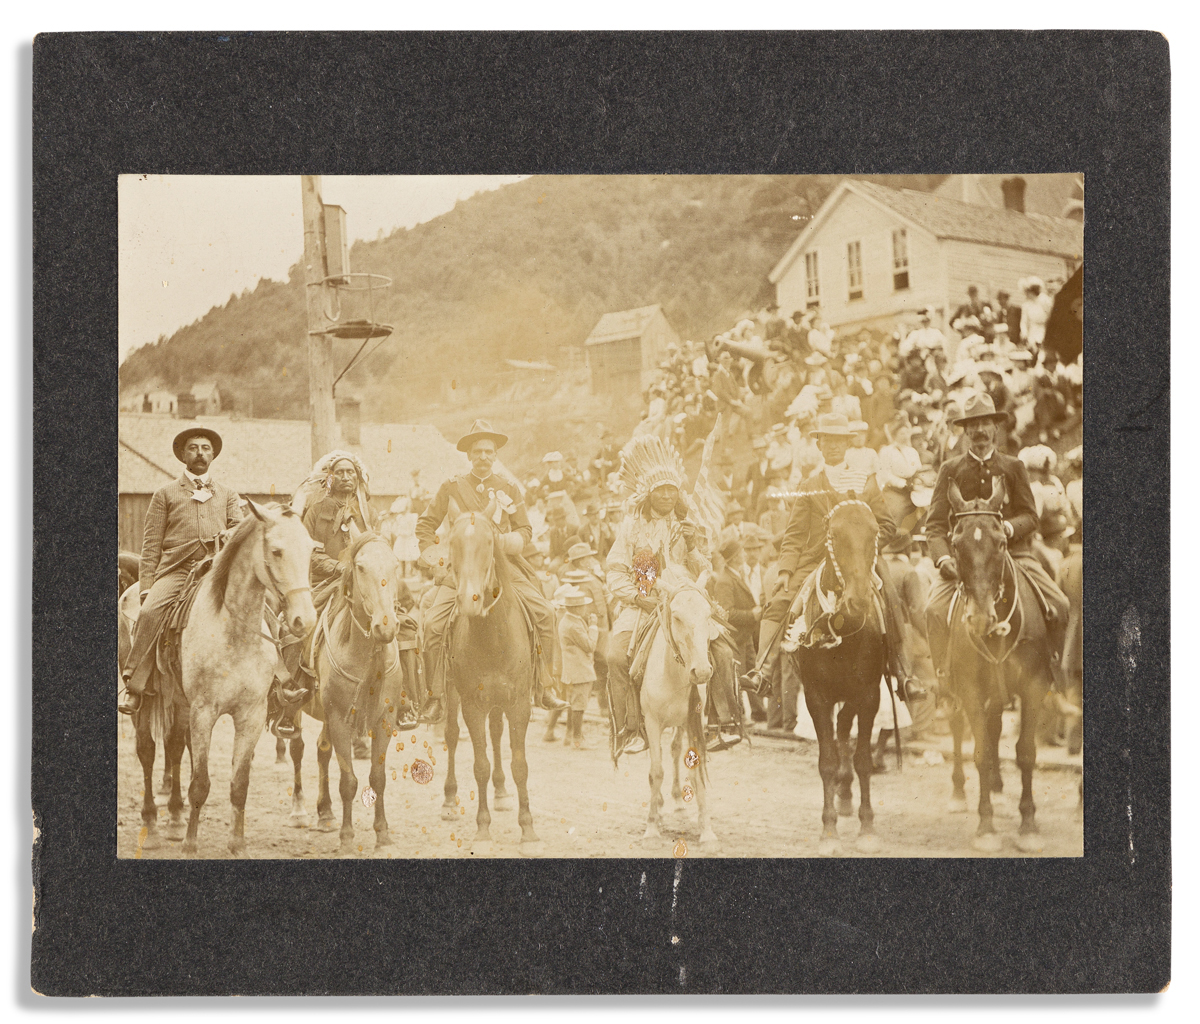 (WEST--SOUTH DAKOTA.) Photograph of famed Deadwood lawman Seth Bullock on parade, flanked by American Indians.